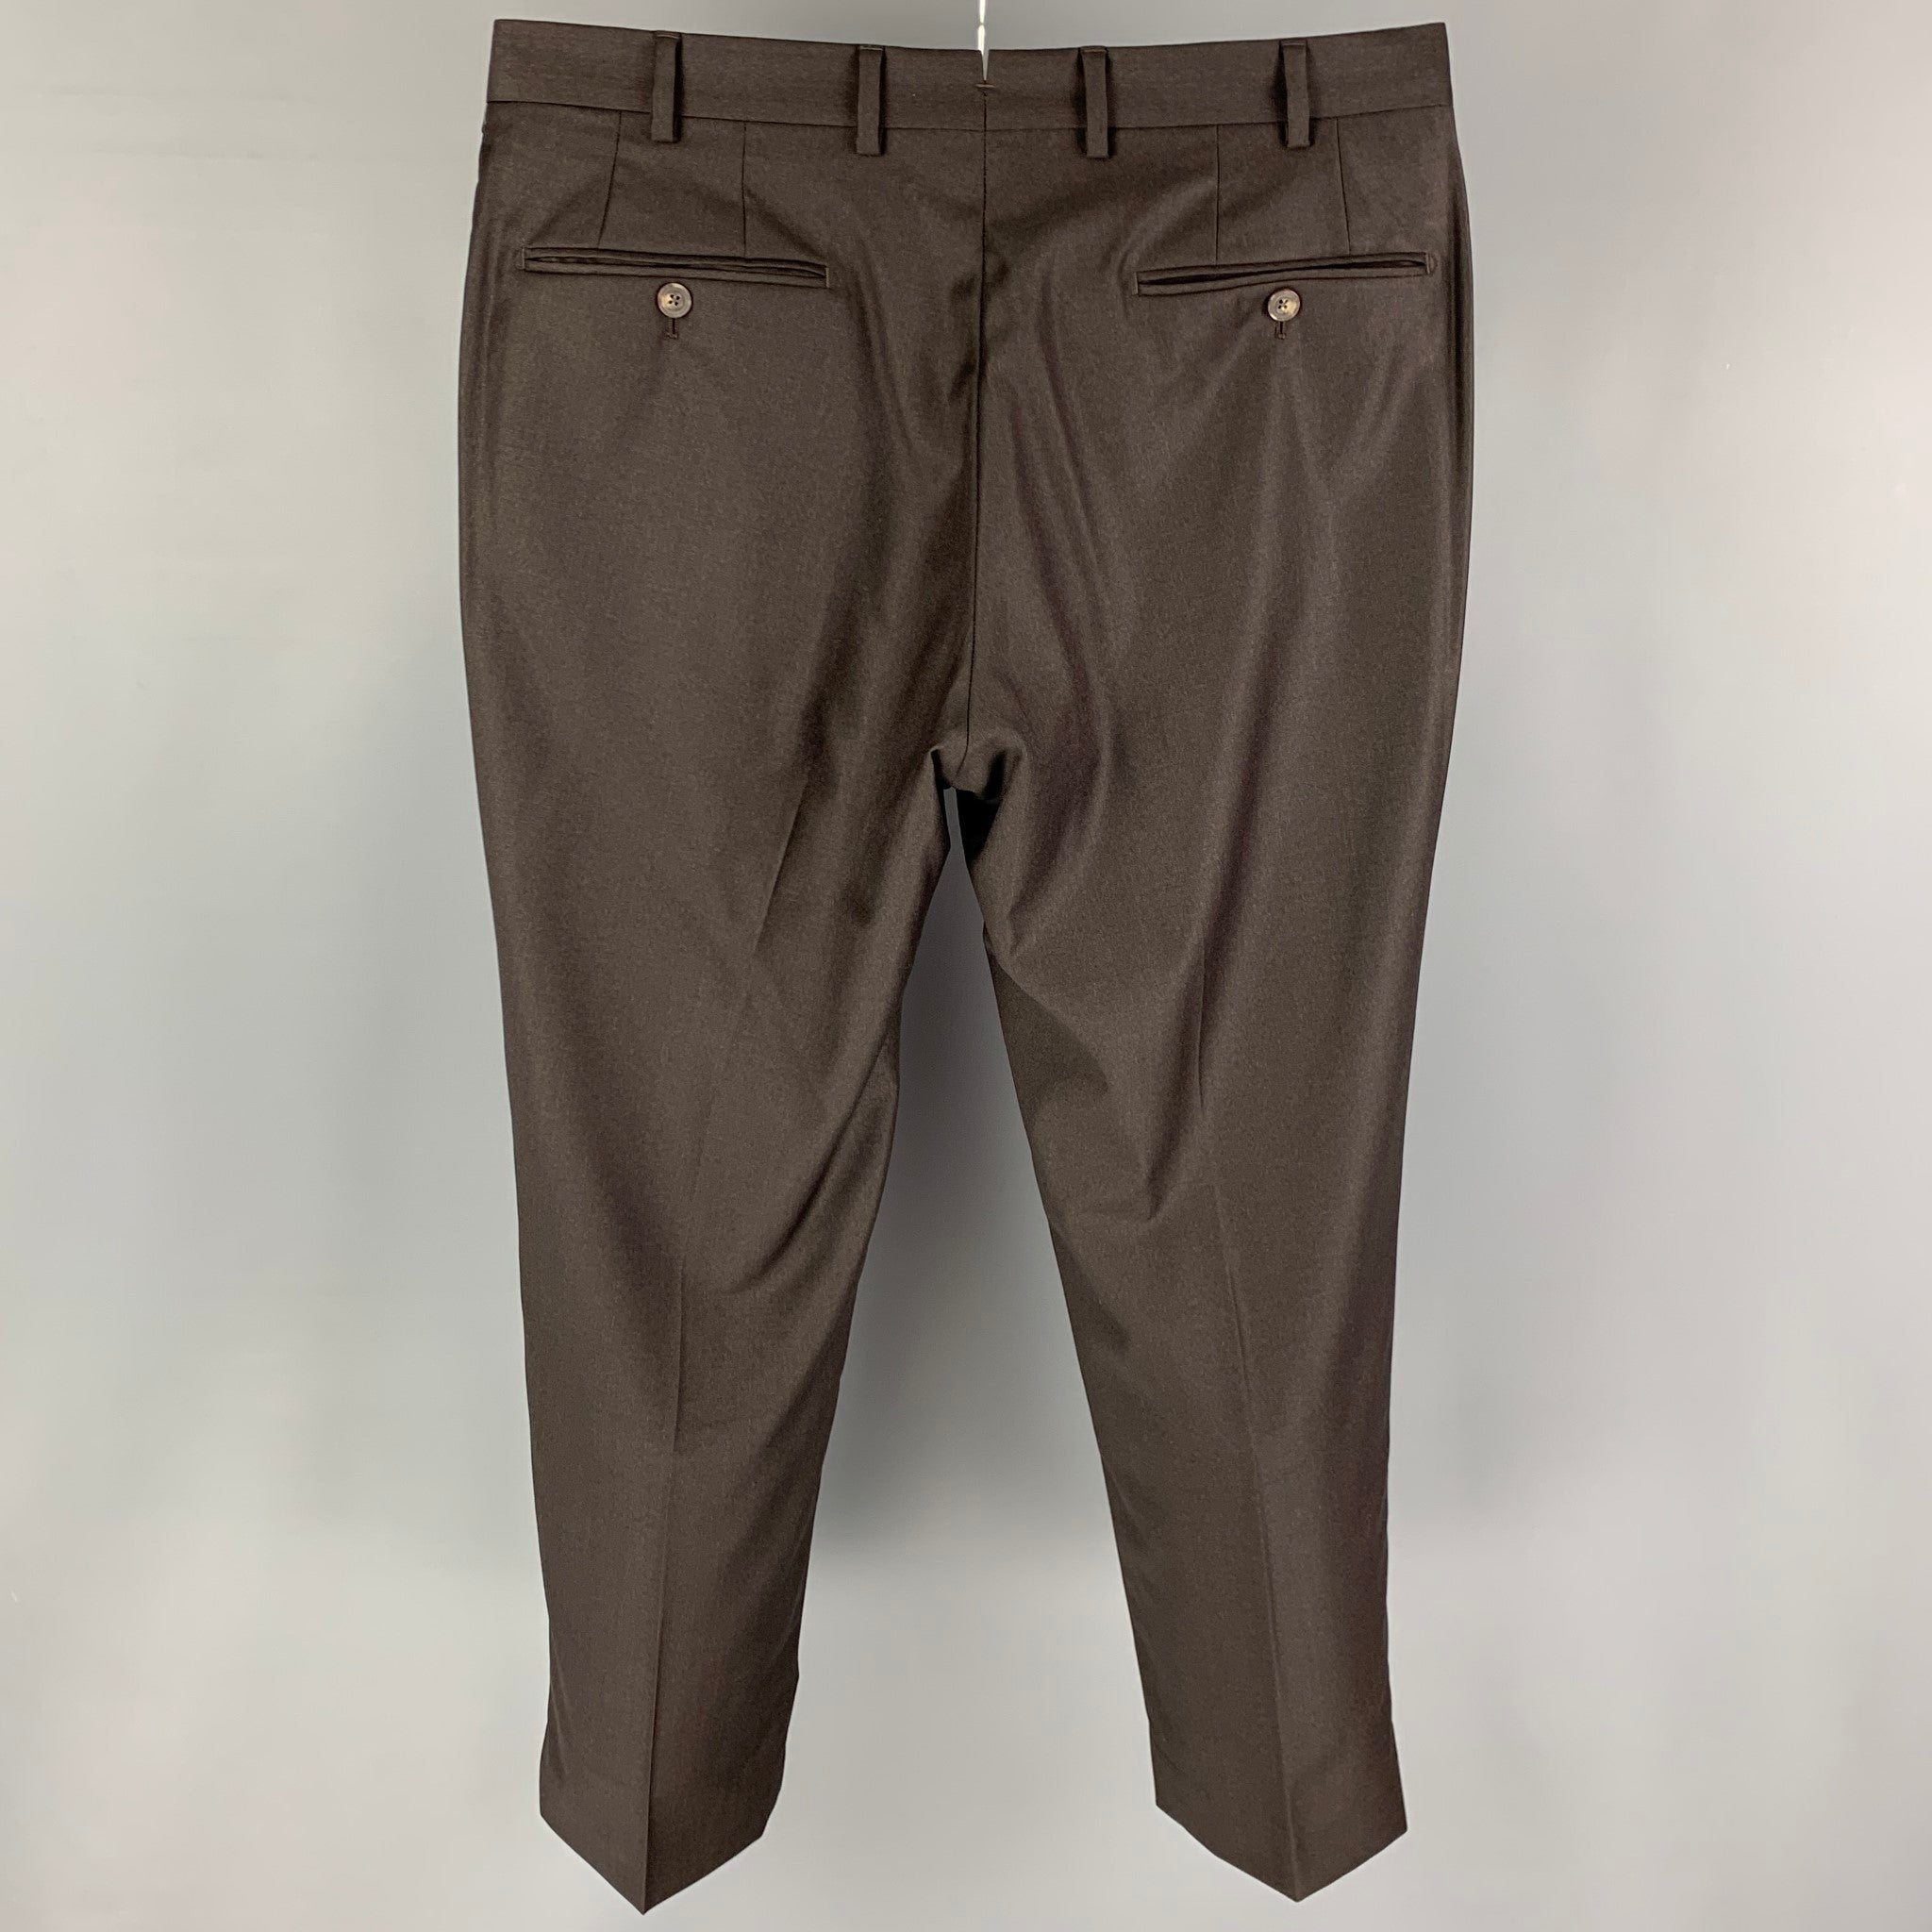 Size 34 trouser pants, Women's Fashion, Bottoms, Other Bottoms on Carousell